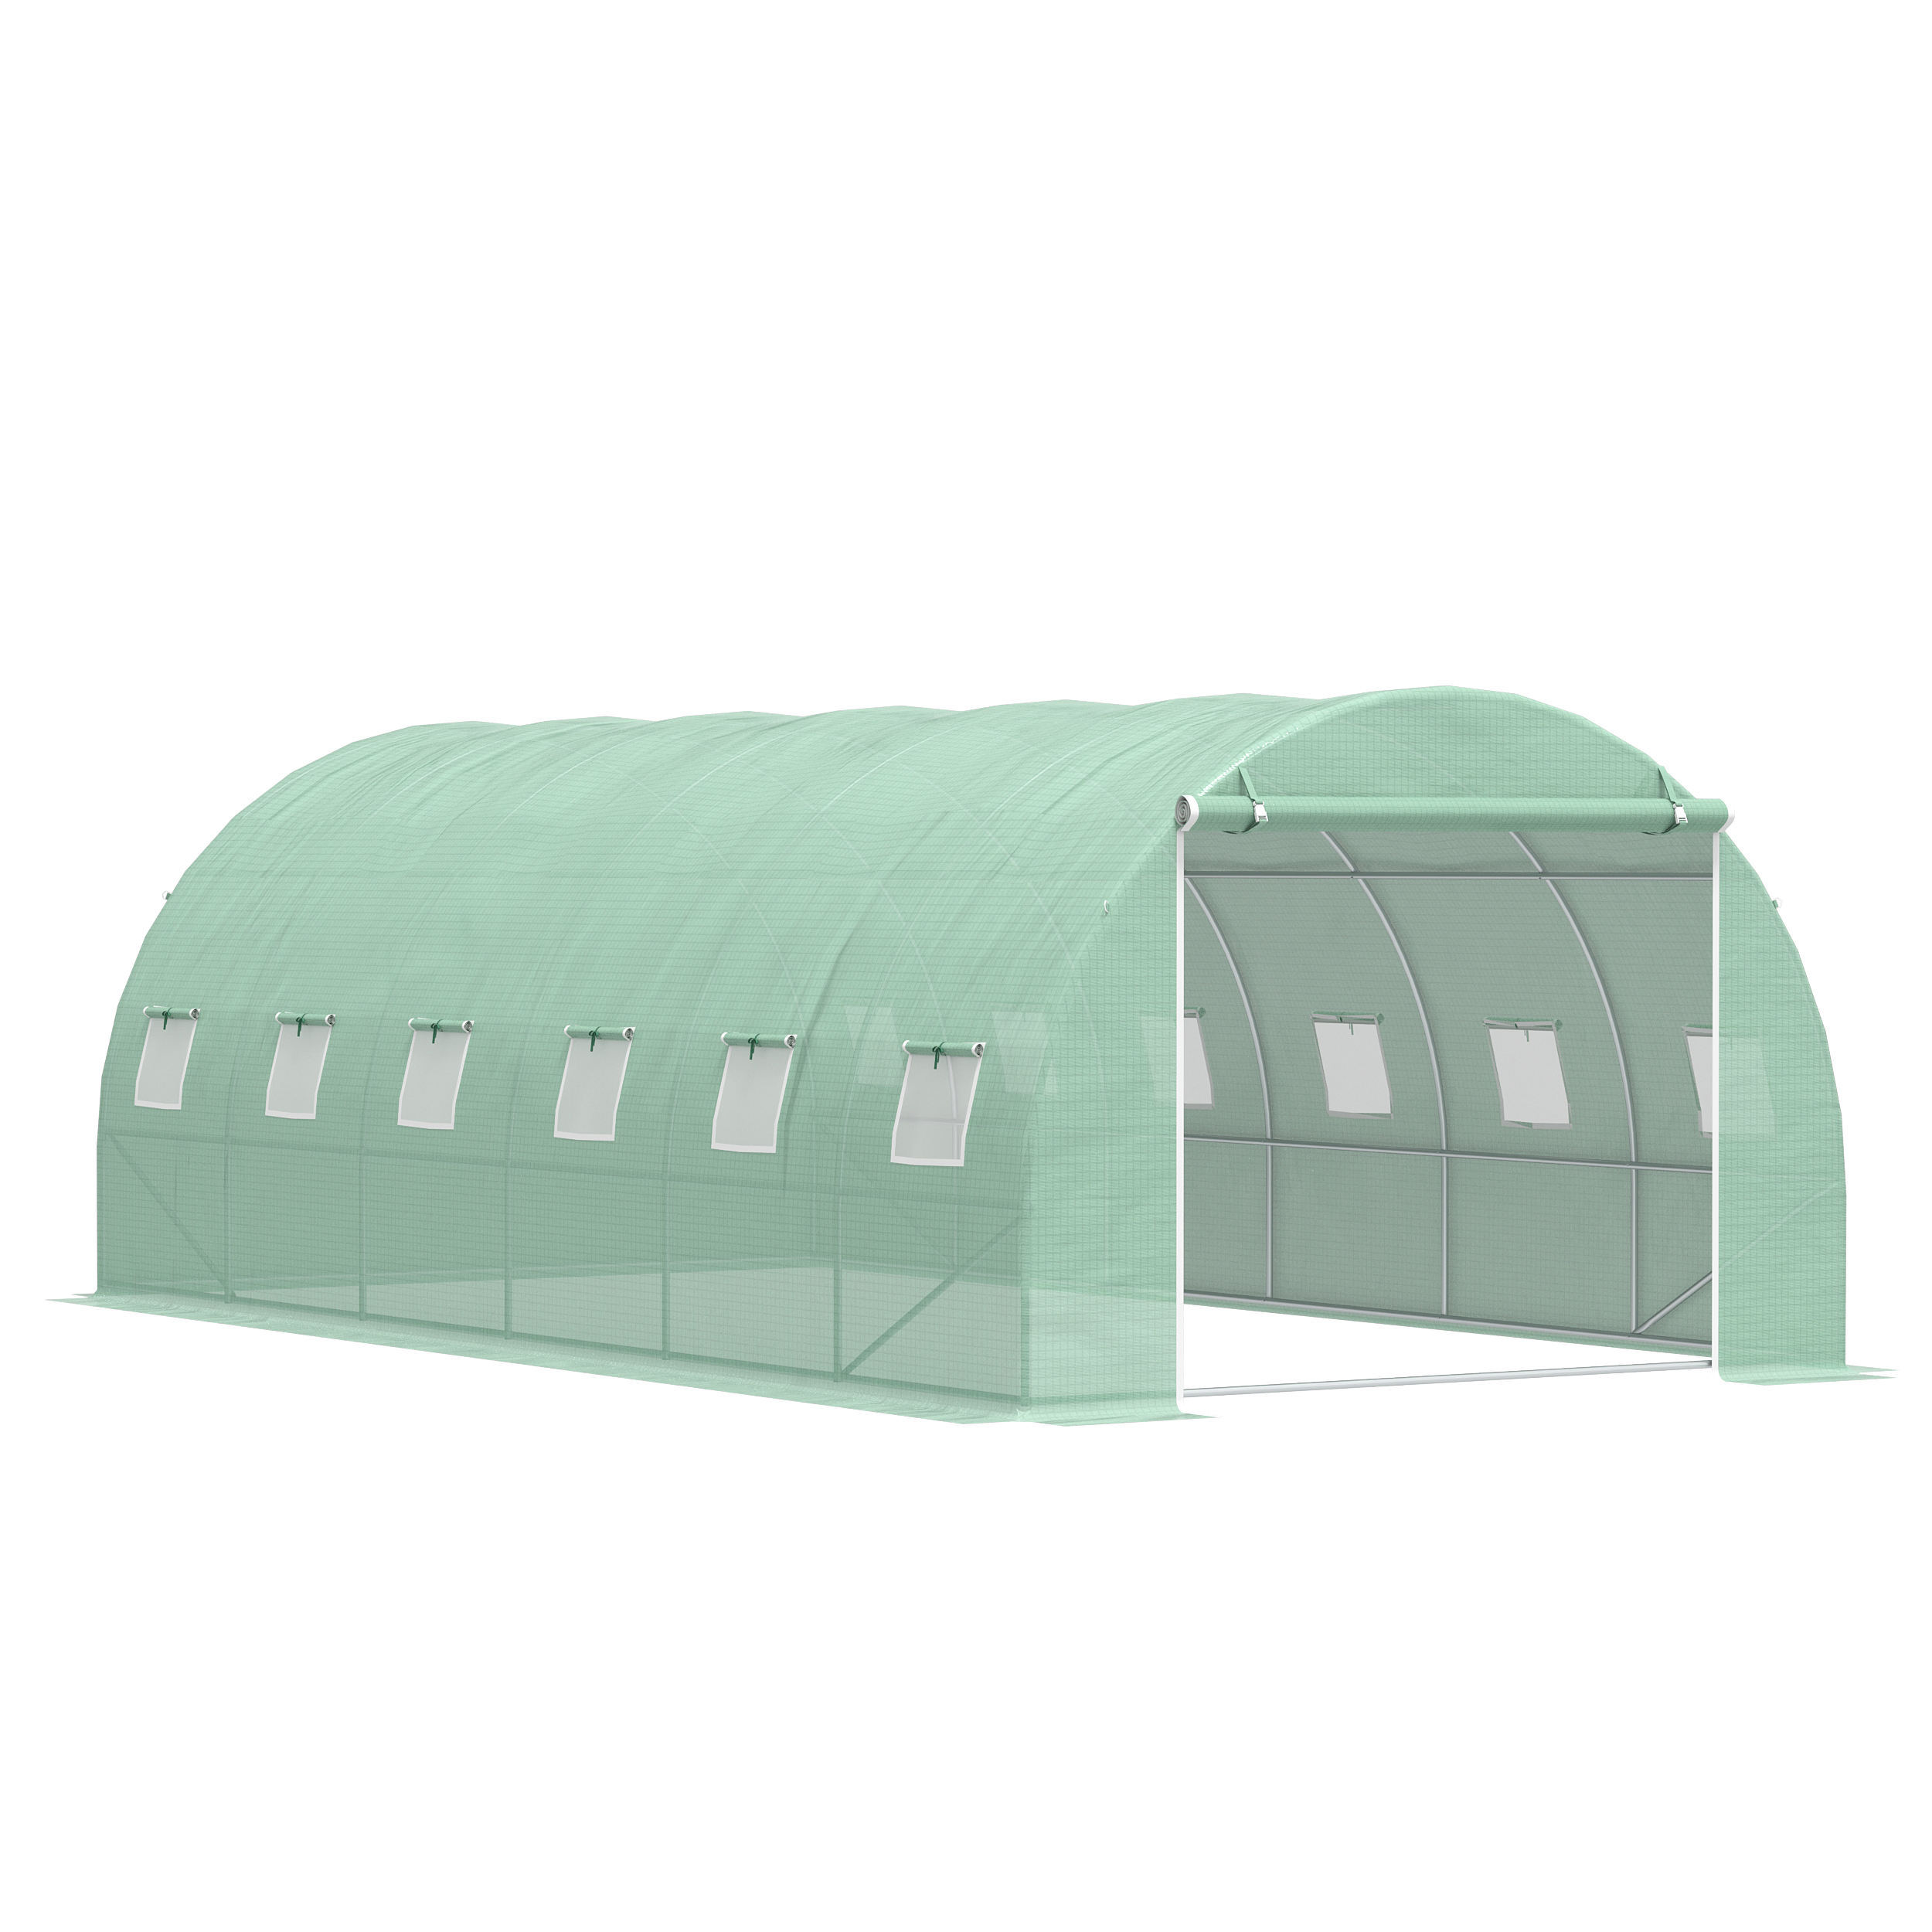 Outsunny 6 X 3 X 2 M Large Walk-in Greenhouse Garden Polytunnel Greenhouse With Steel Frame, Zippered Door And Roll Up Windows, Green